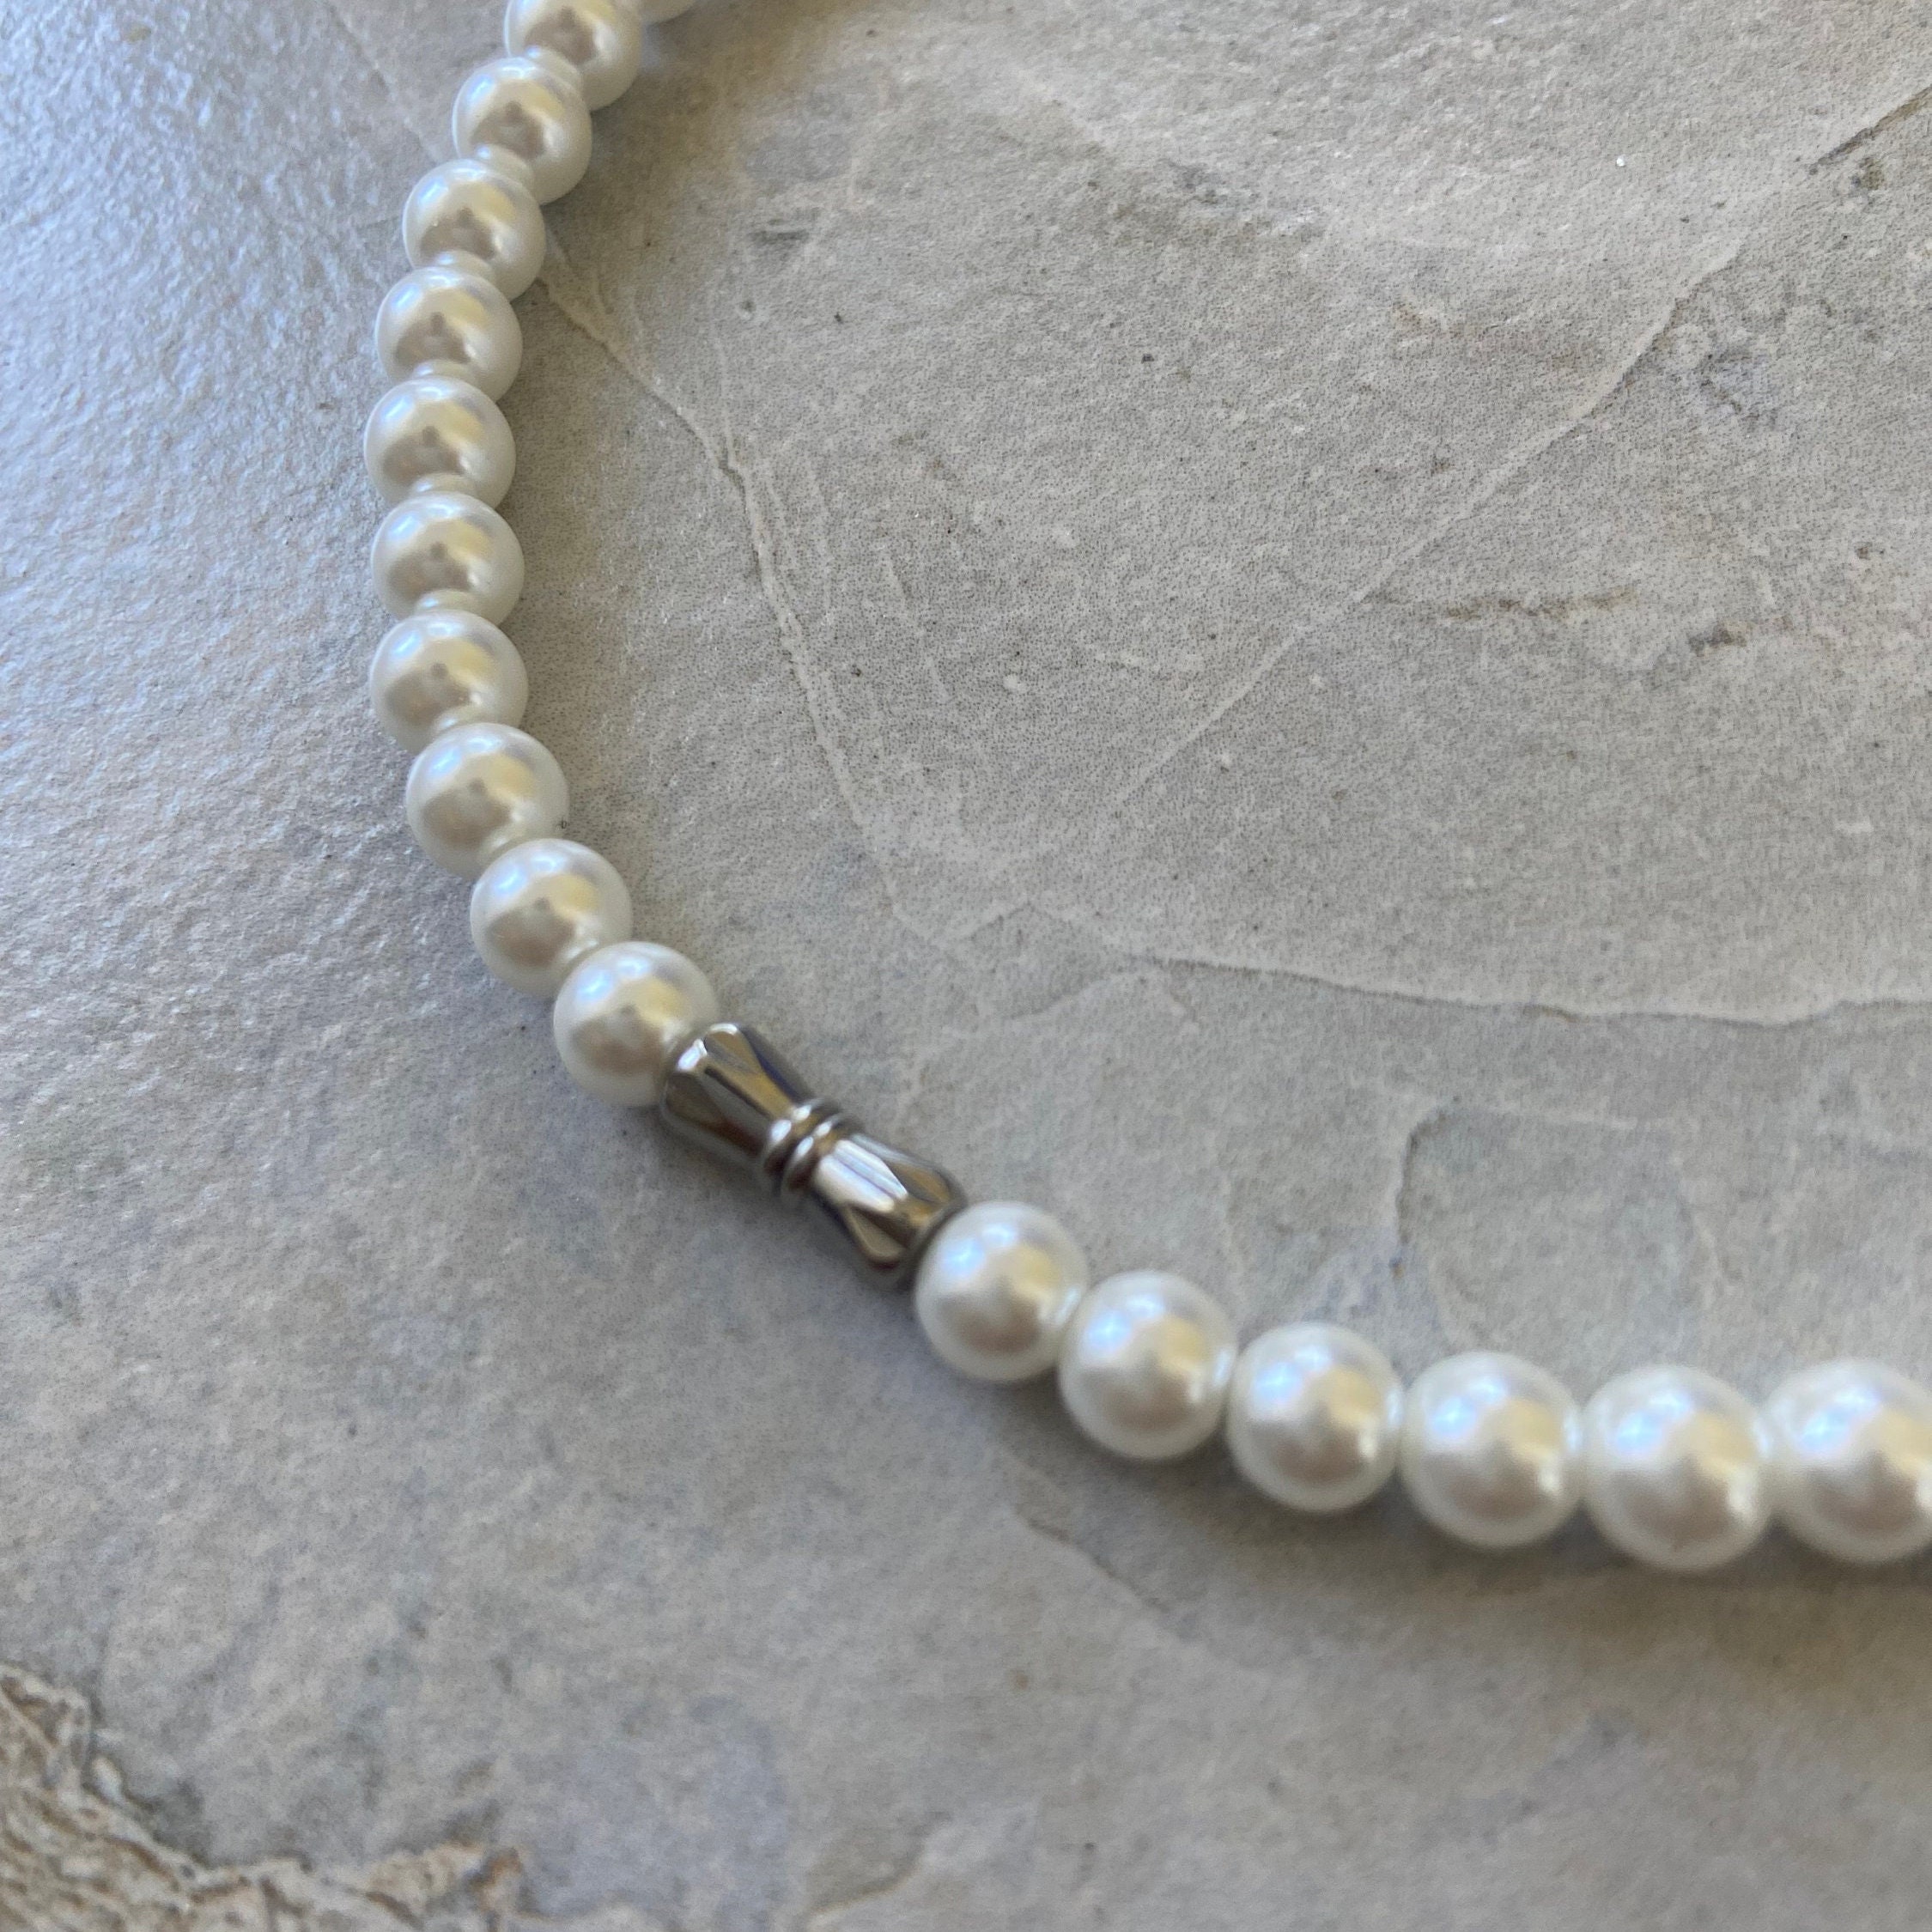 Pearl Necklace for Men Mens Pearl Necklace Chain 6mm Pearl - Etsy